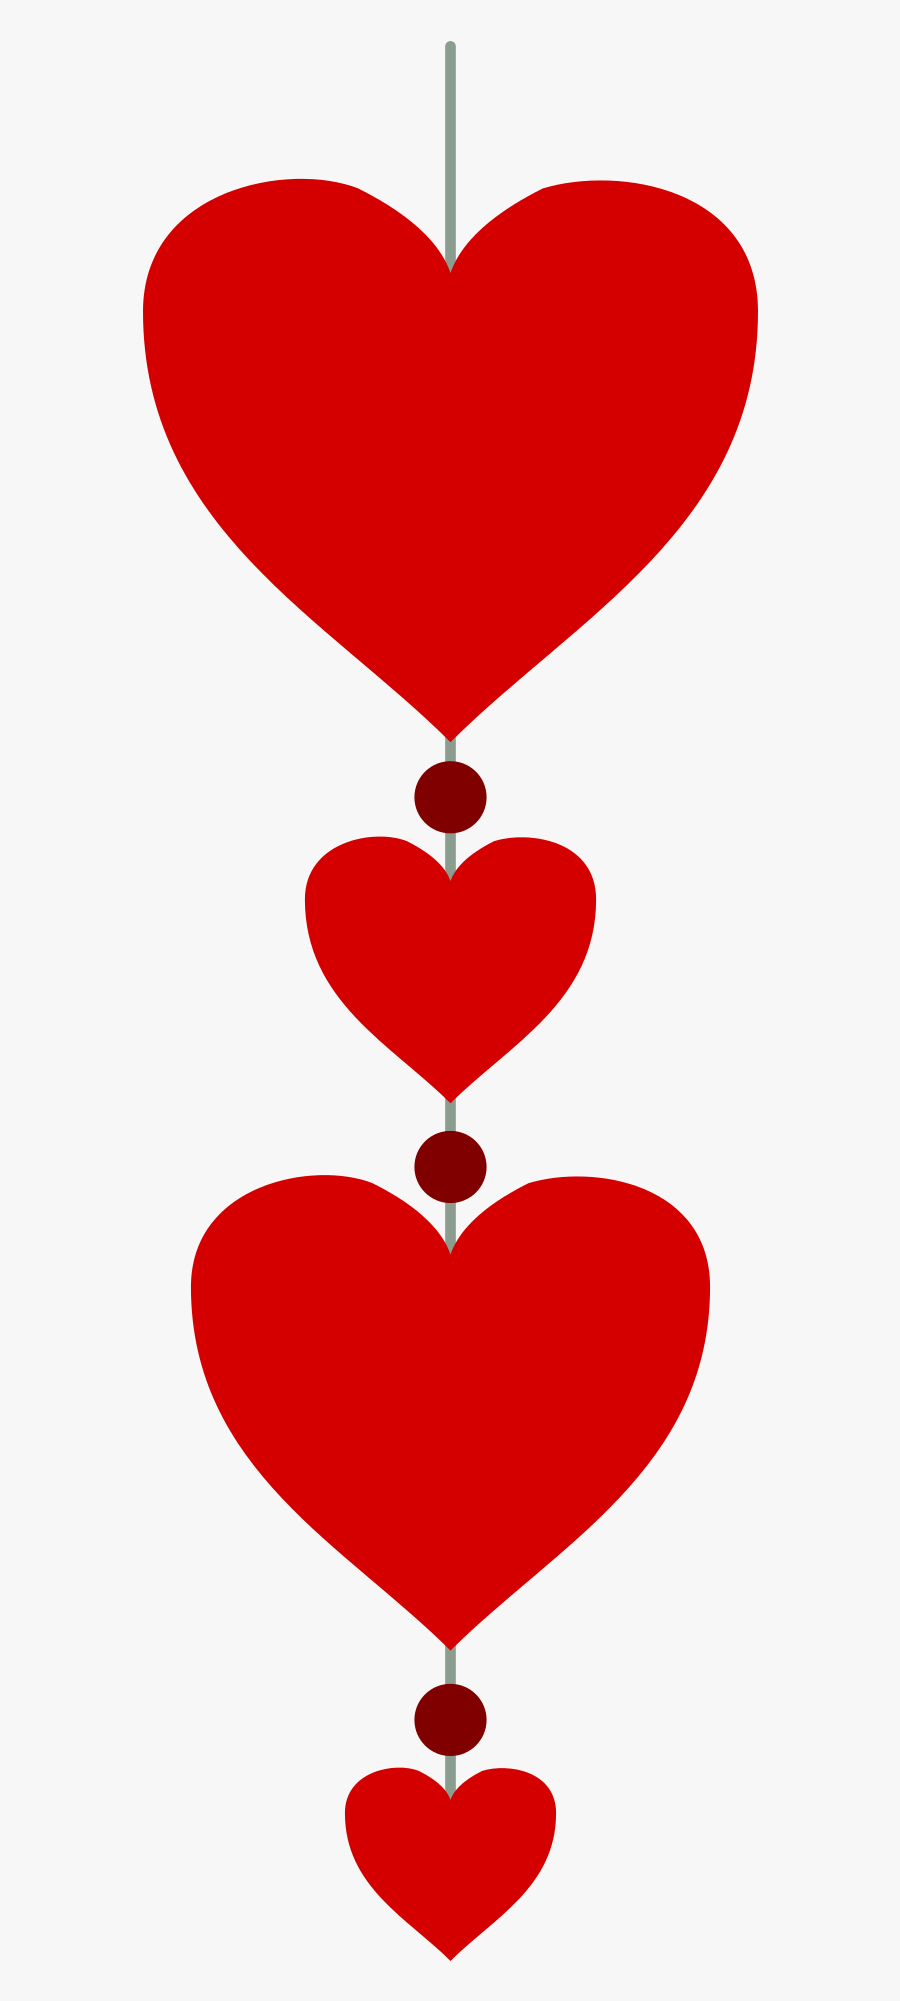 Hearts In A Vertical Line Png Image - Vertical Line Of Hearts, Transparent Clipart